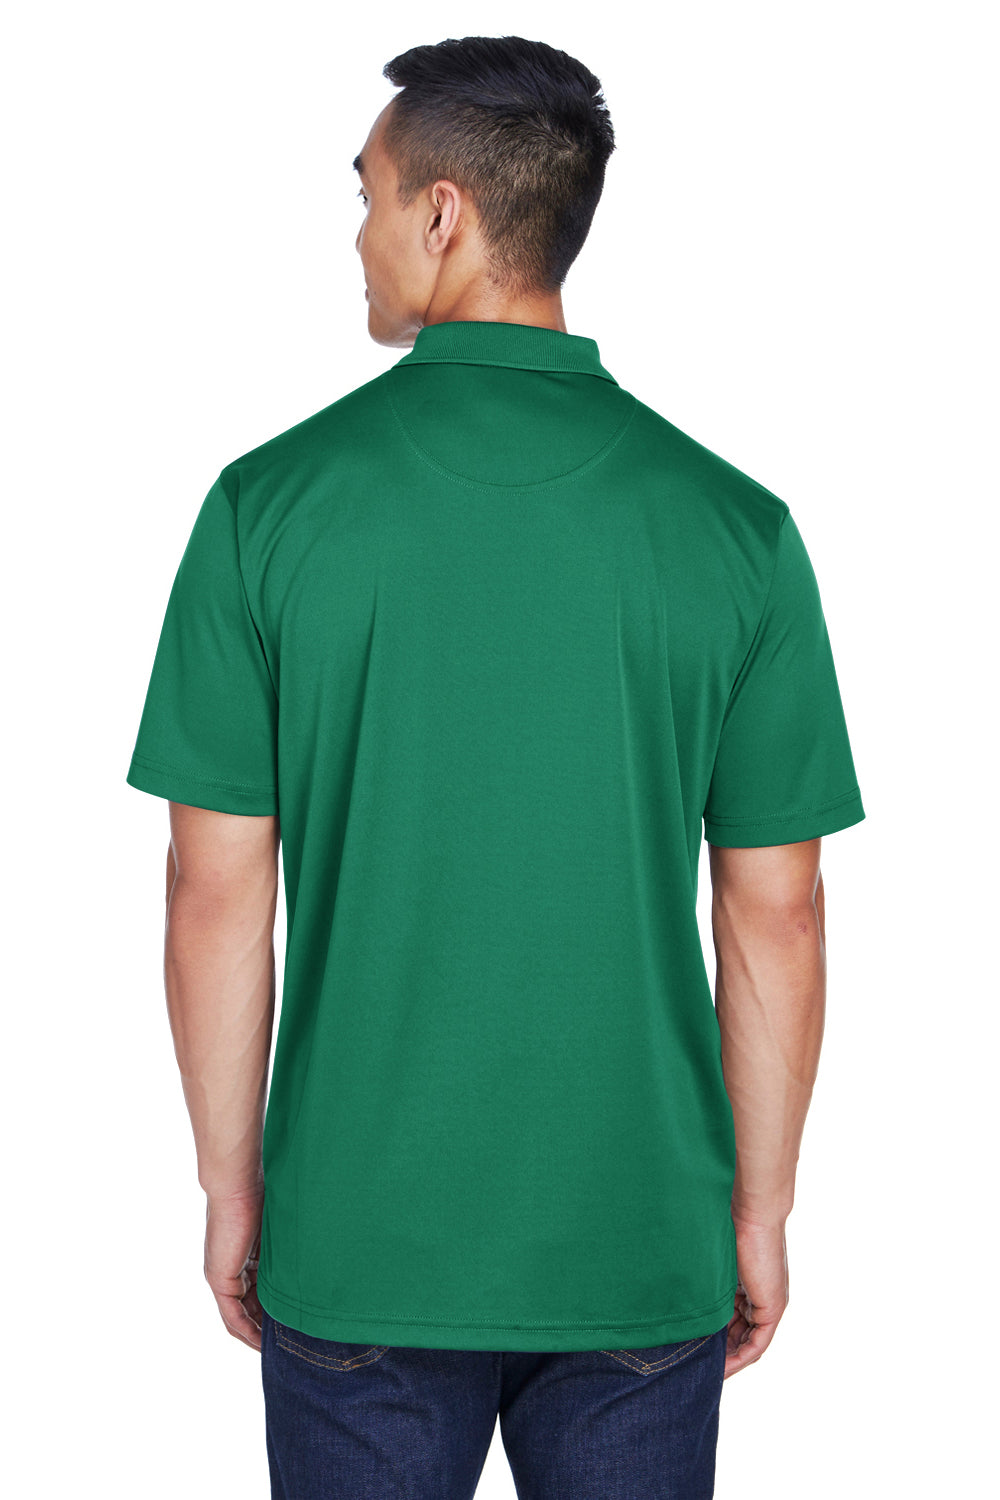 UltraClub 8405 Mens Cool & Dry Moisture Wicking Short Sleeve Polo Shirt Forest Green Back